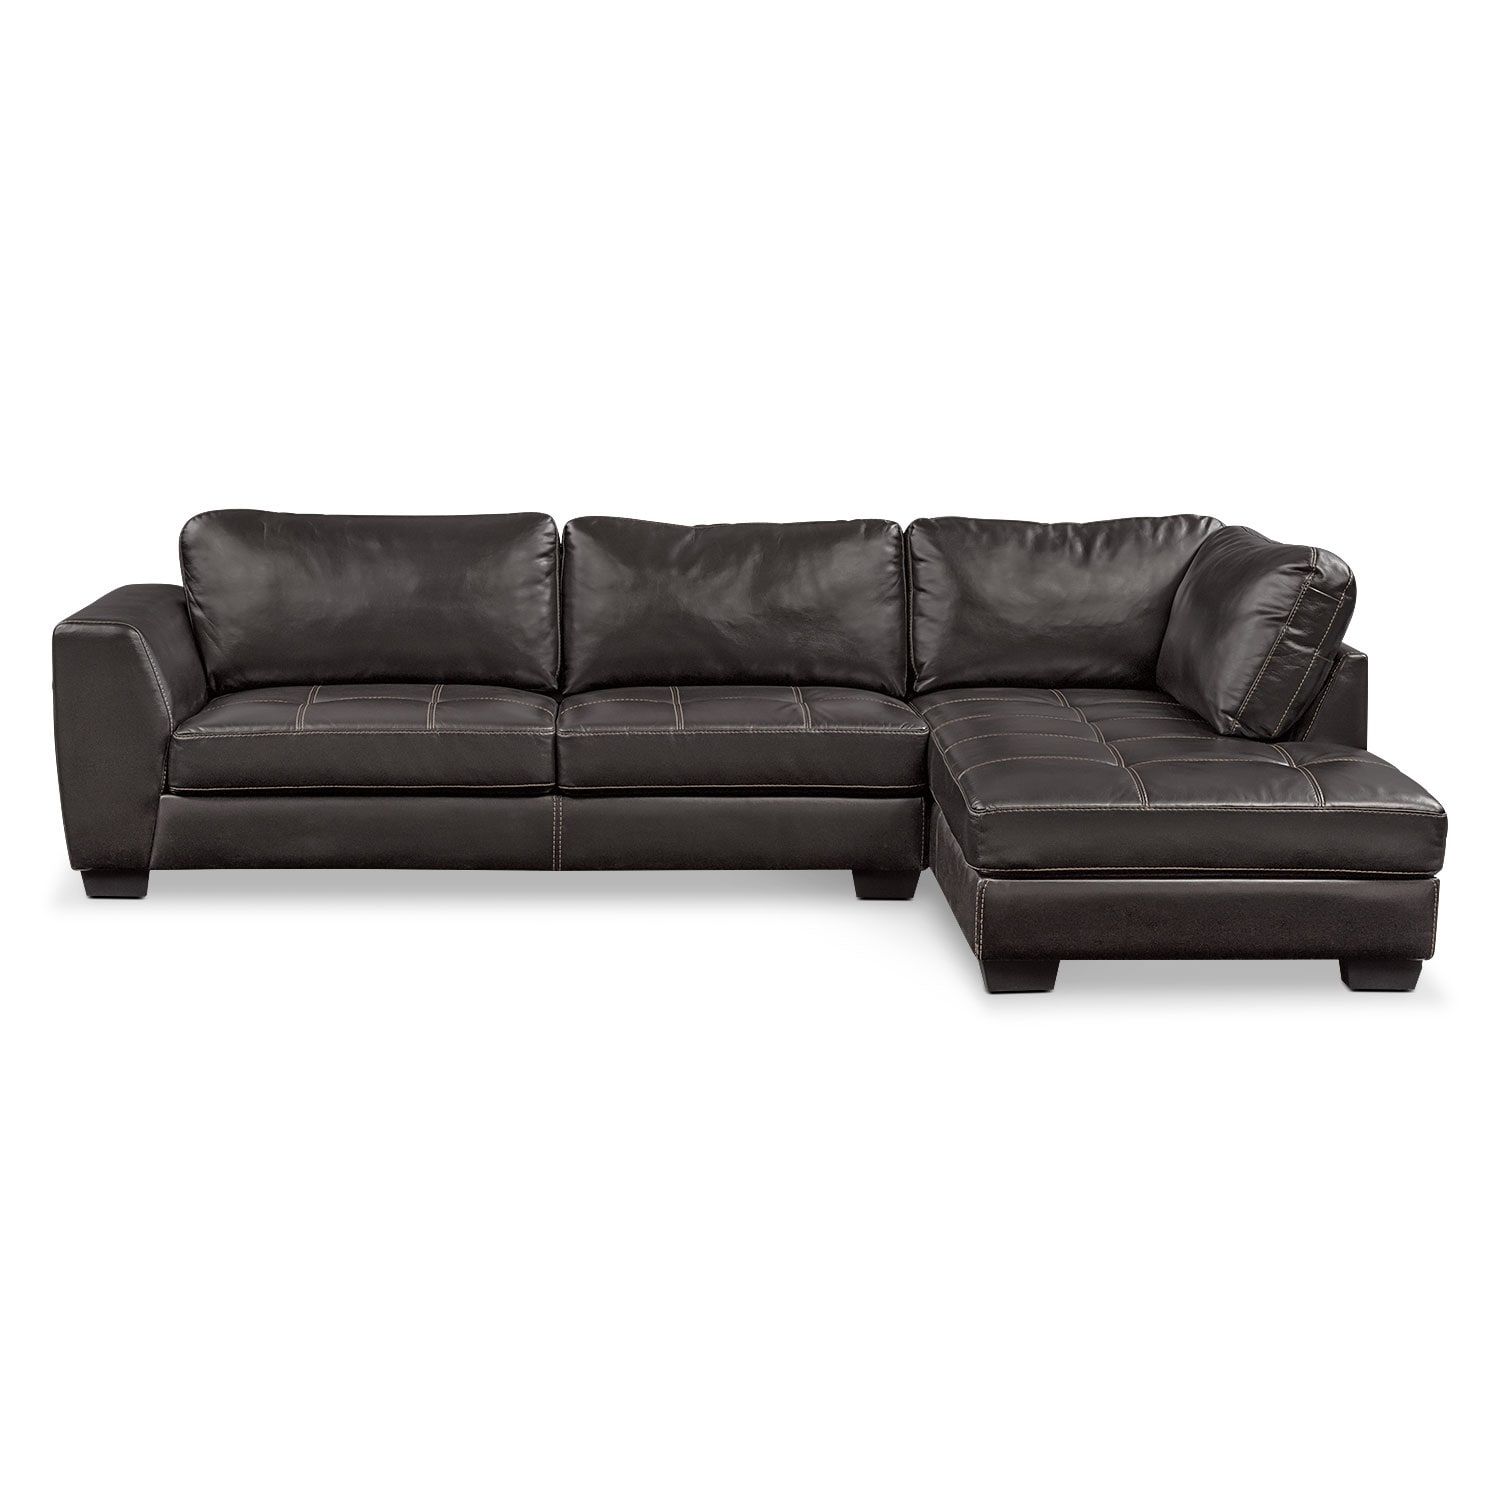 Santana 2 Piece Sectional With Right Facing Chaise – Black | Value City Pertaining To Right Facing Black Sofas (View 4 of 20)